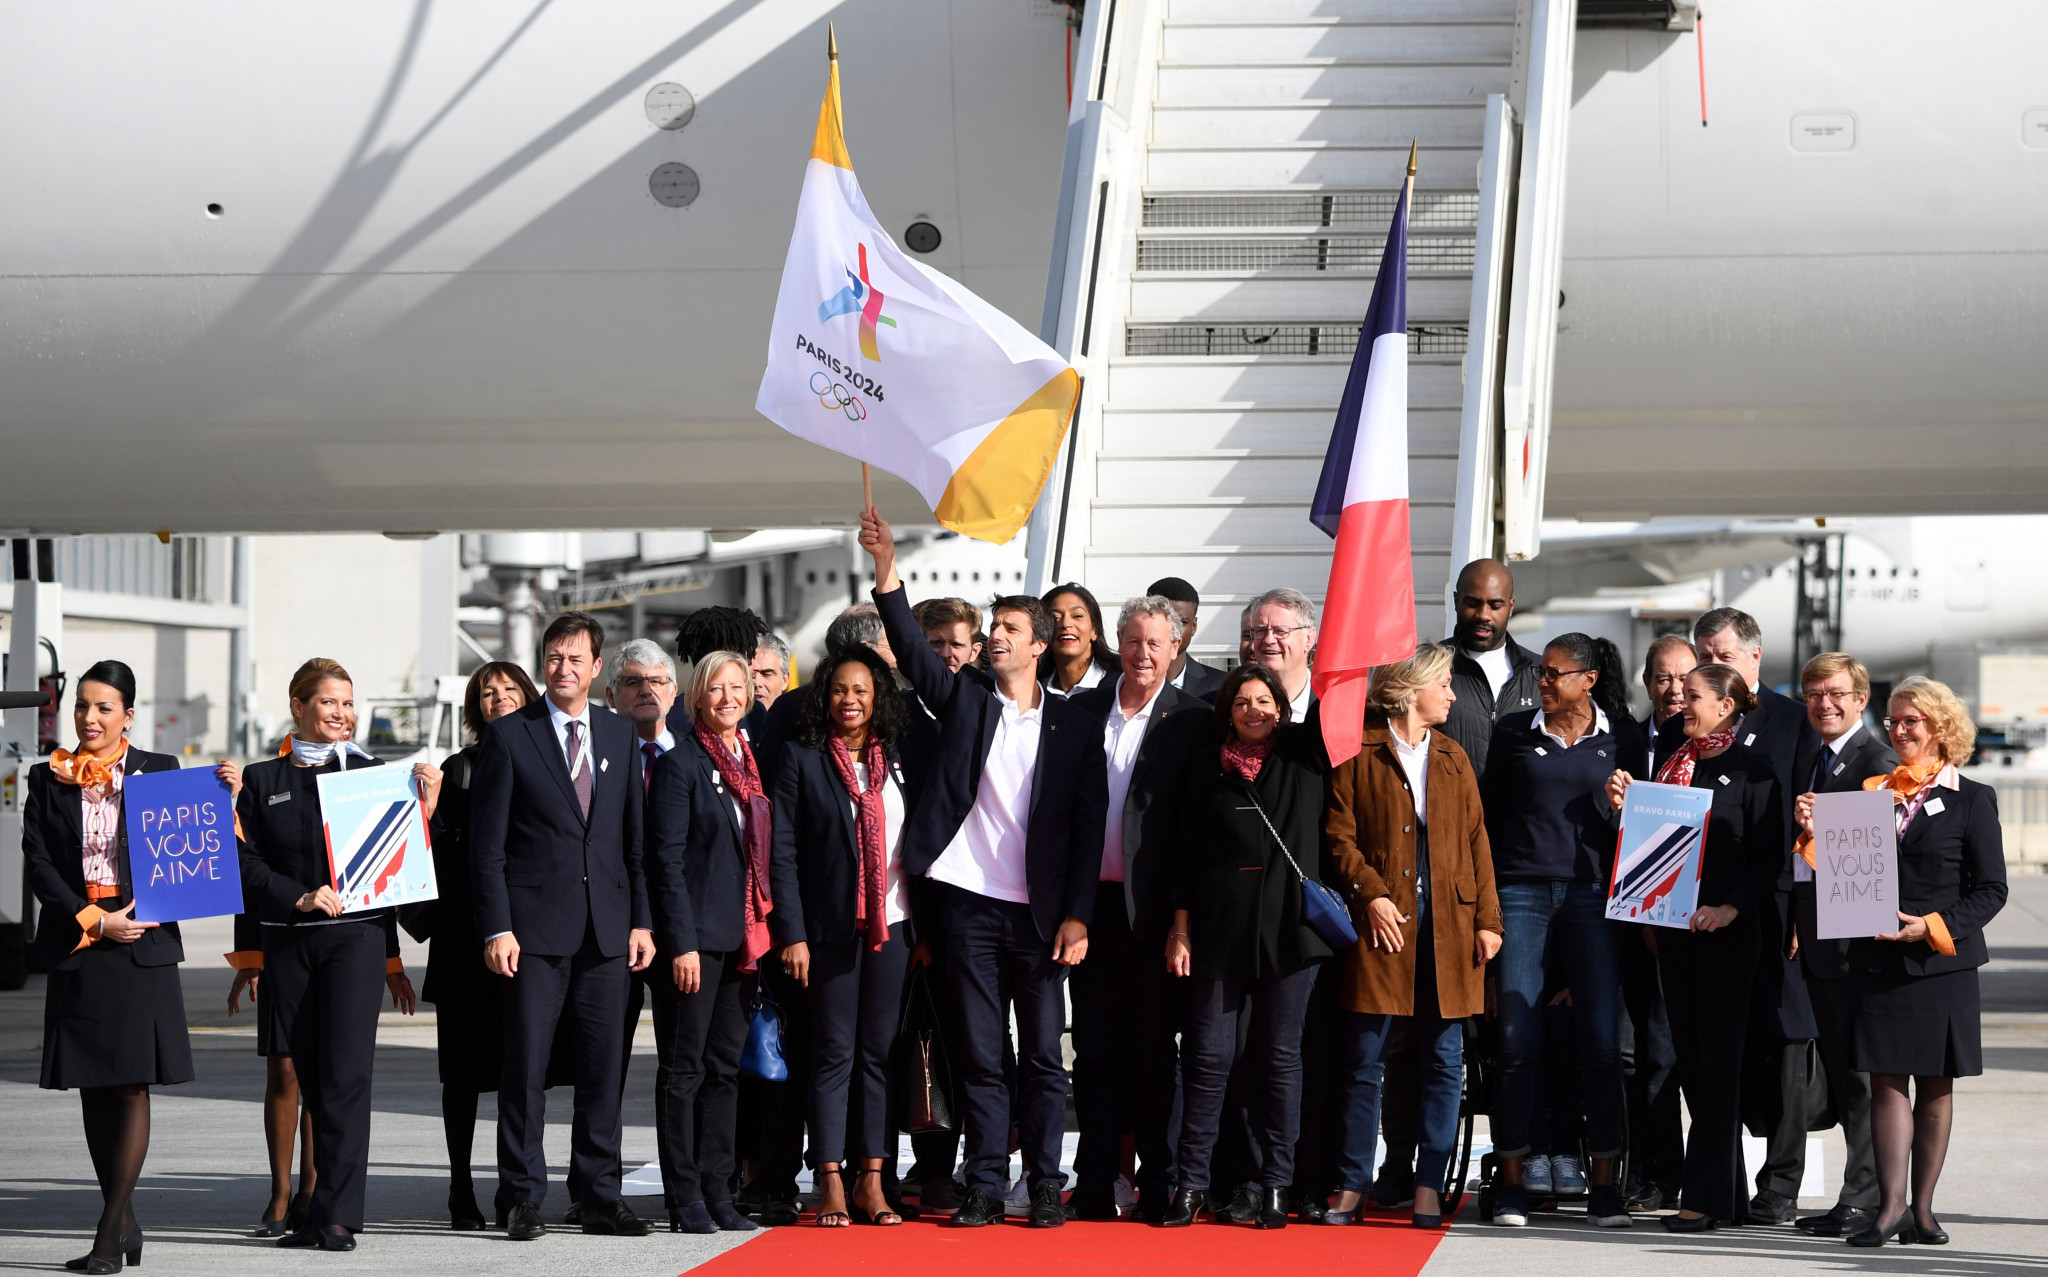 Lessons can be learned from the success of Paris 2024 ©Getty Images